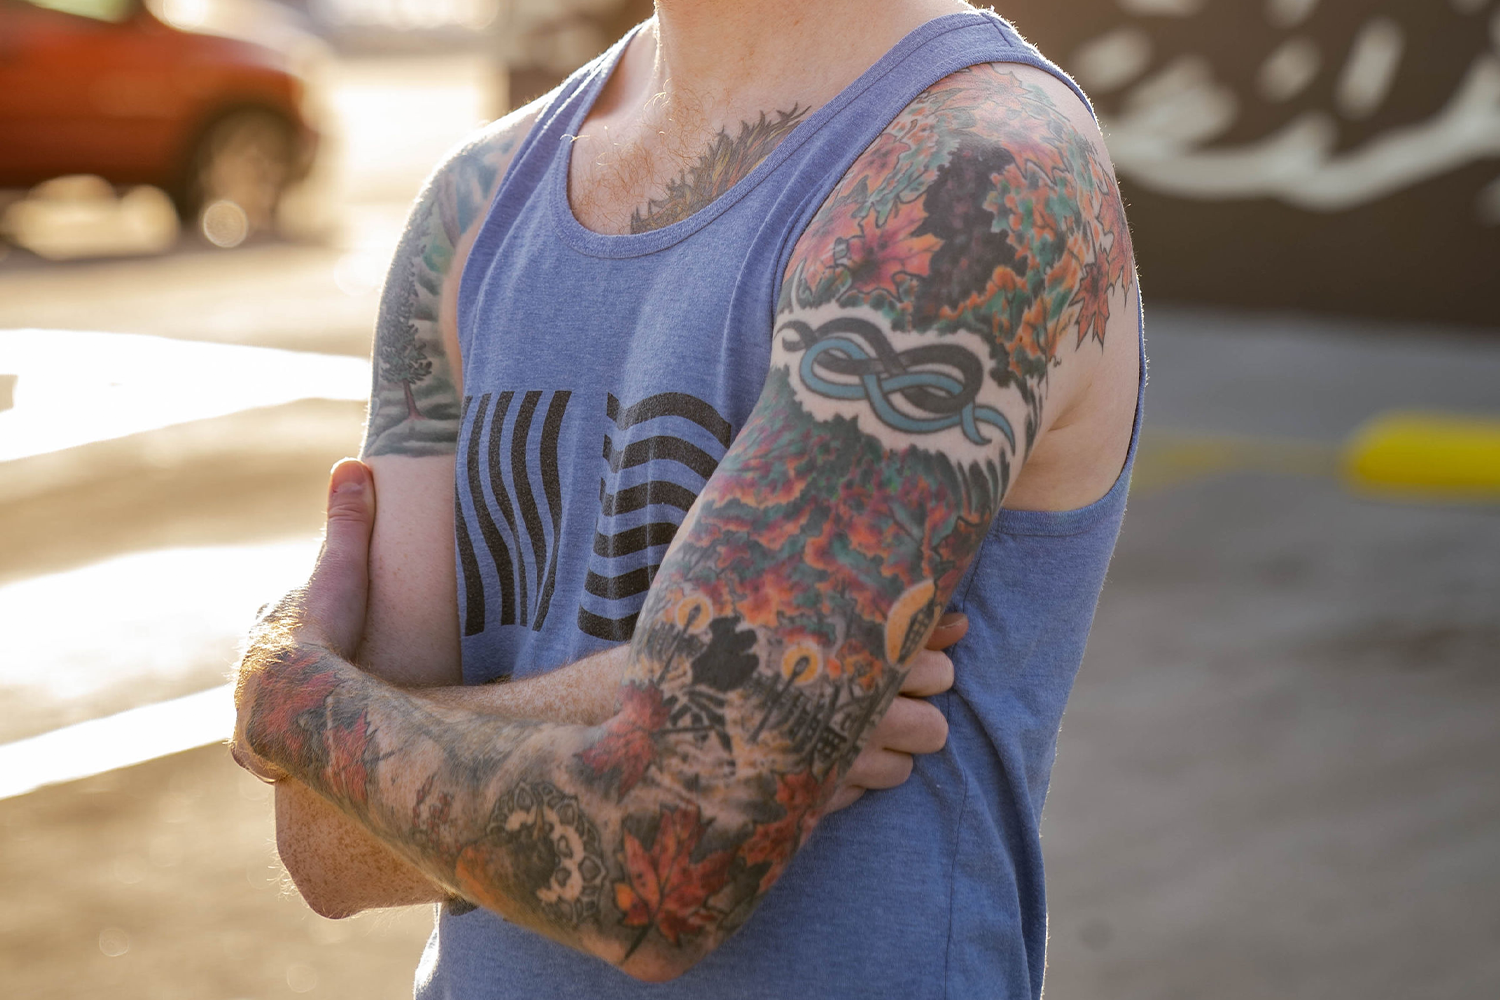 Share more than 124 tattoo shading styles